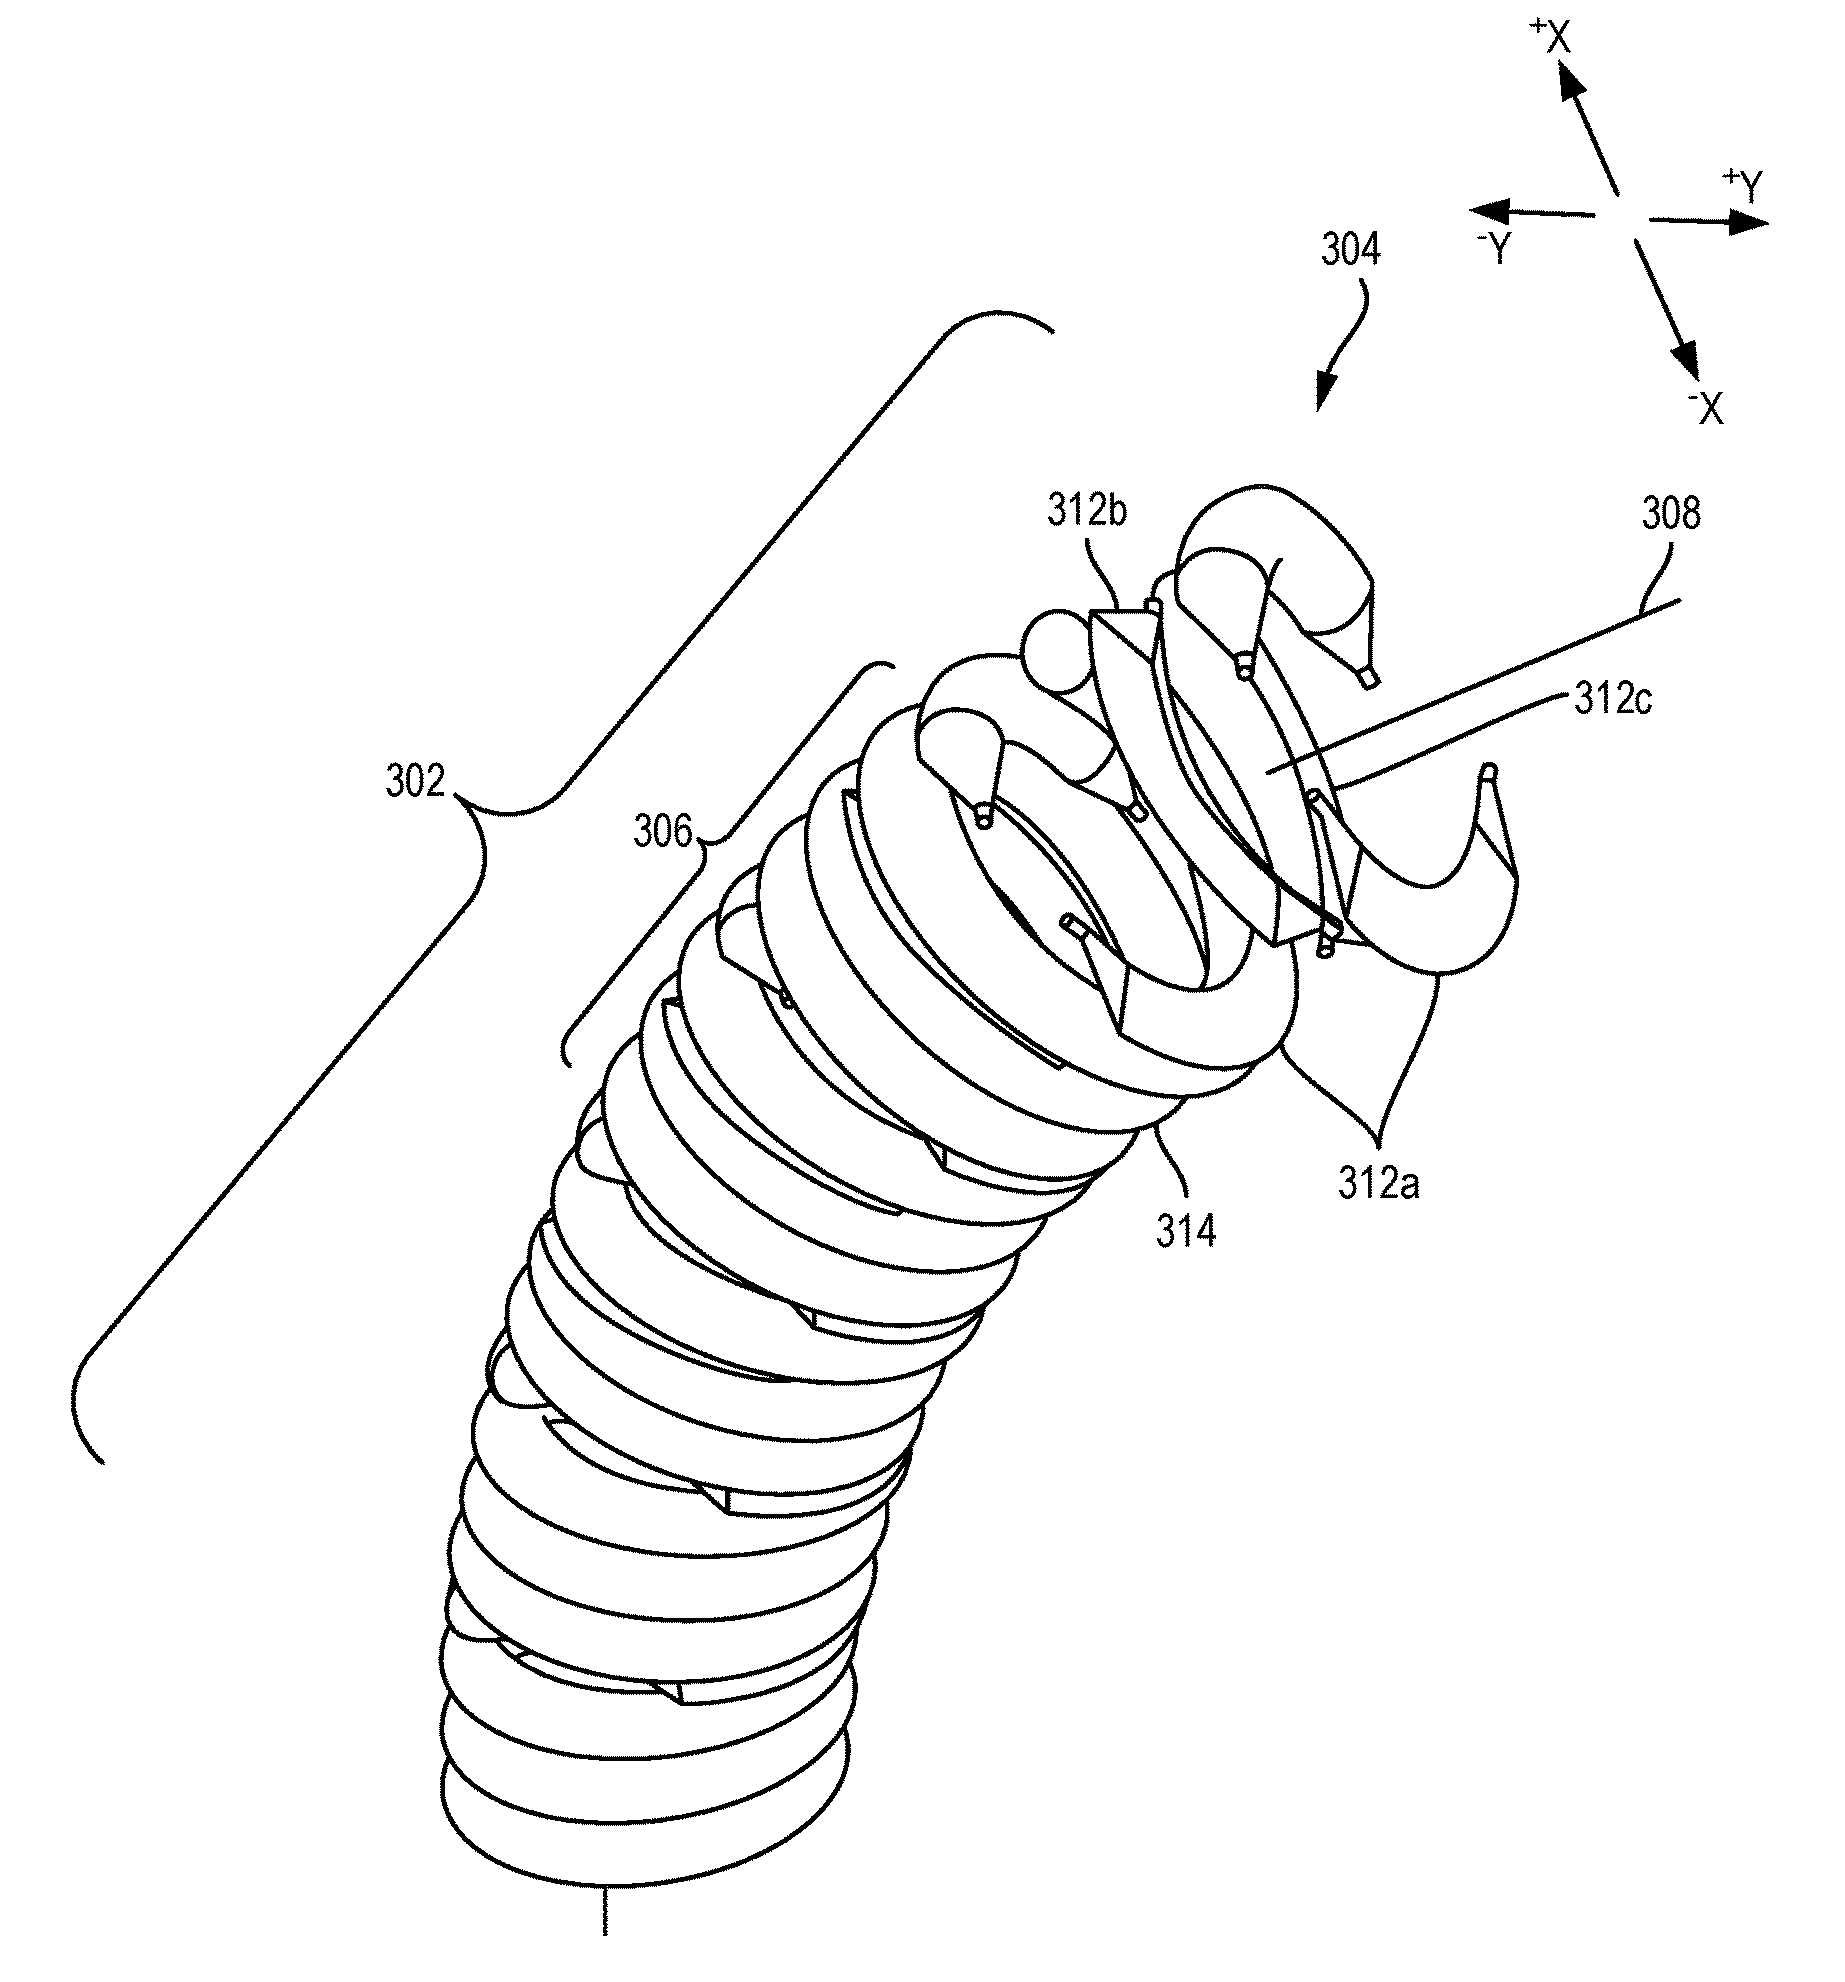 Fluid-Expandable Body Articulation of Catheters and Other Flexible Structures